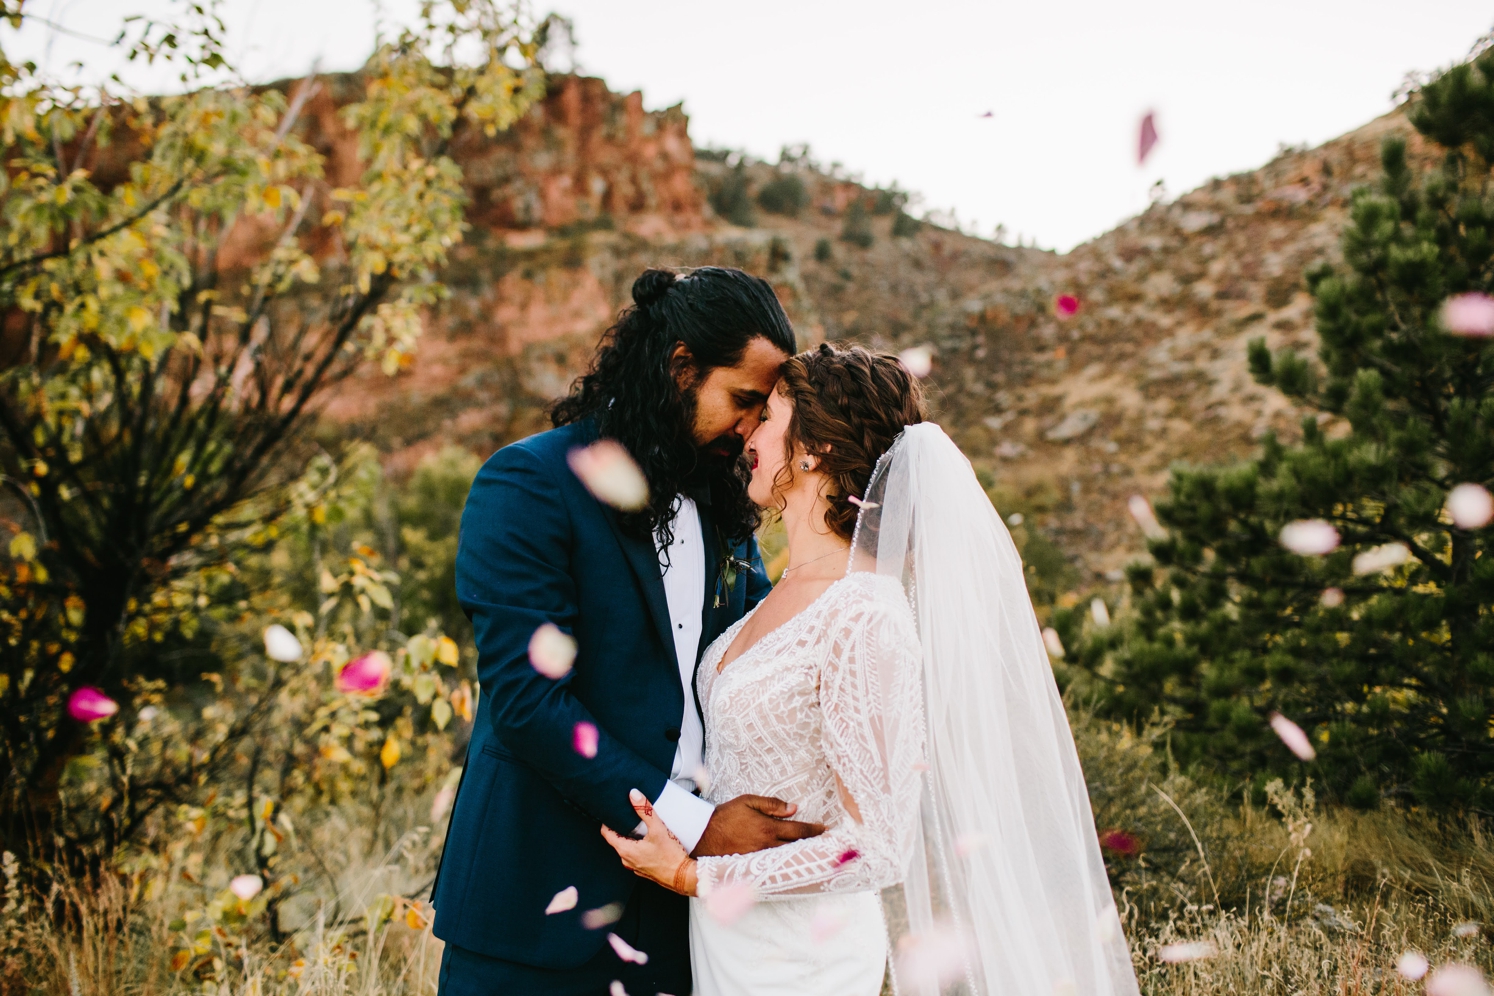 Couple kissing after wedding in Colorado with rose petals being thrown in the air | McArthur Weddings and Events